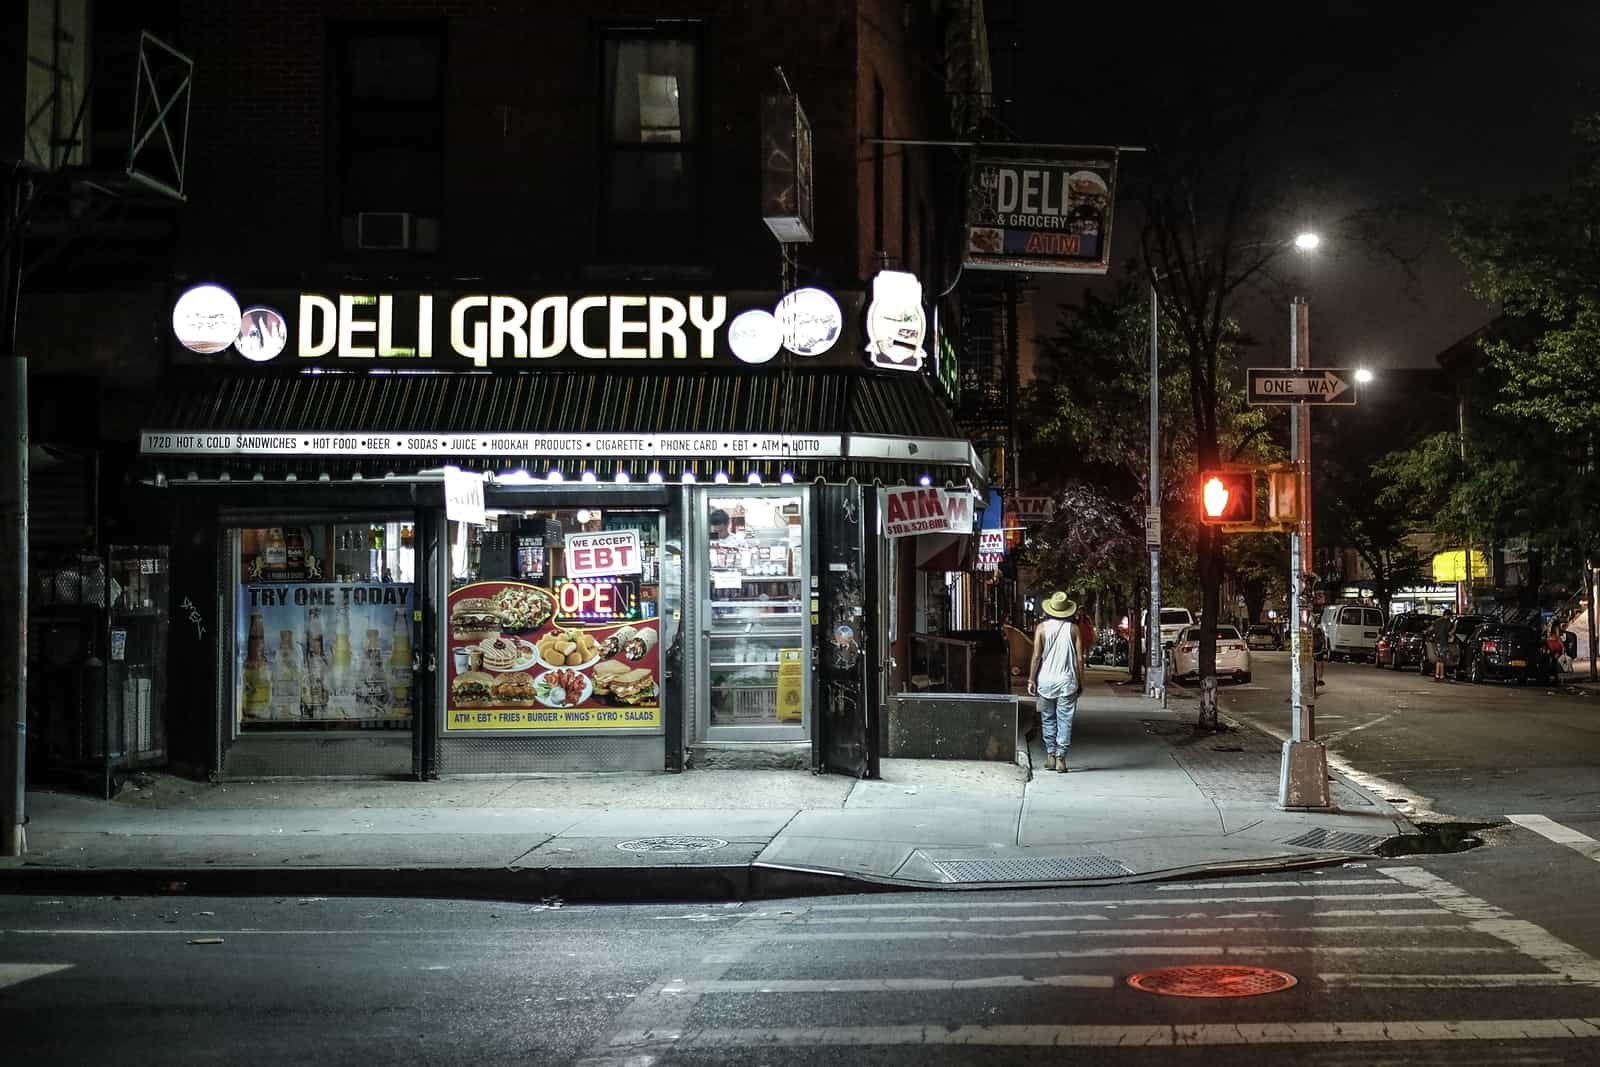 Deli Grocery near road at night time